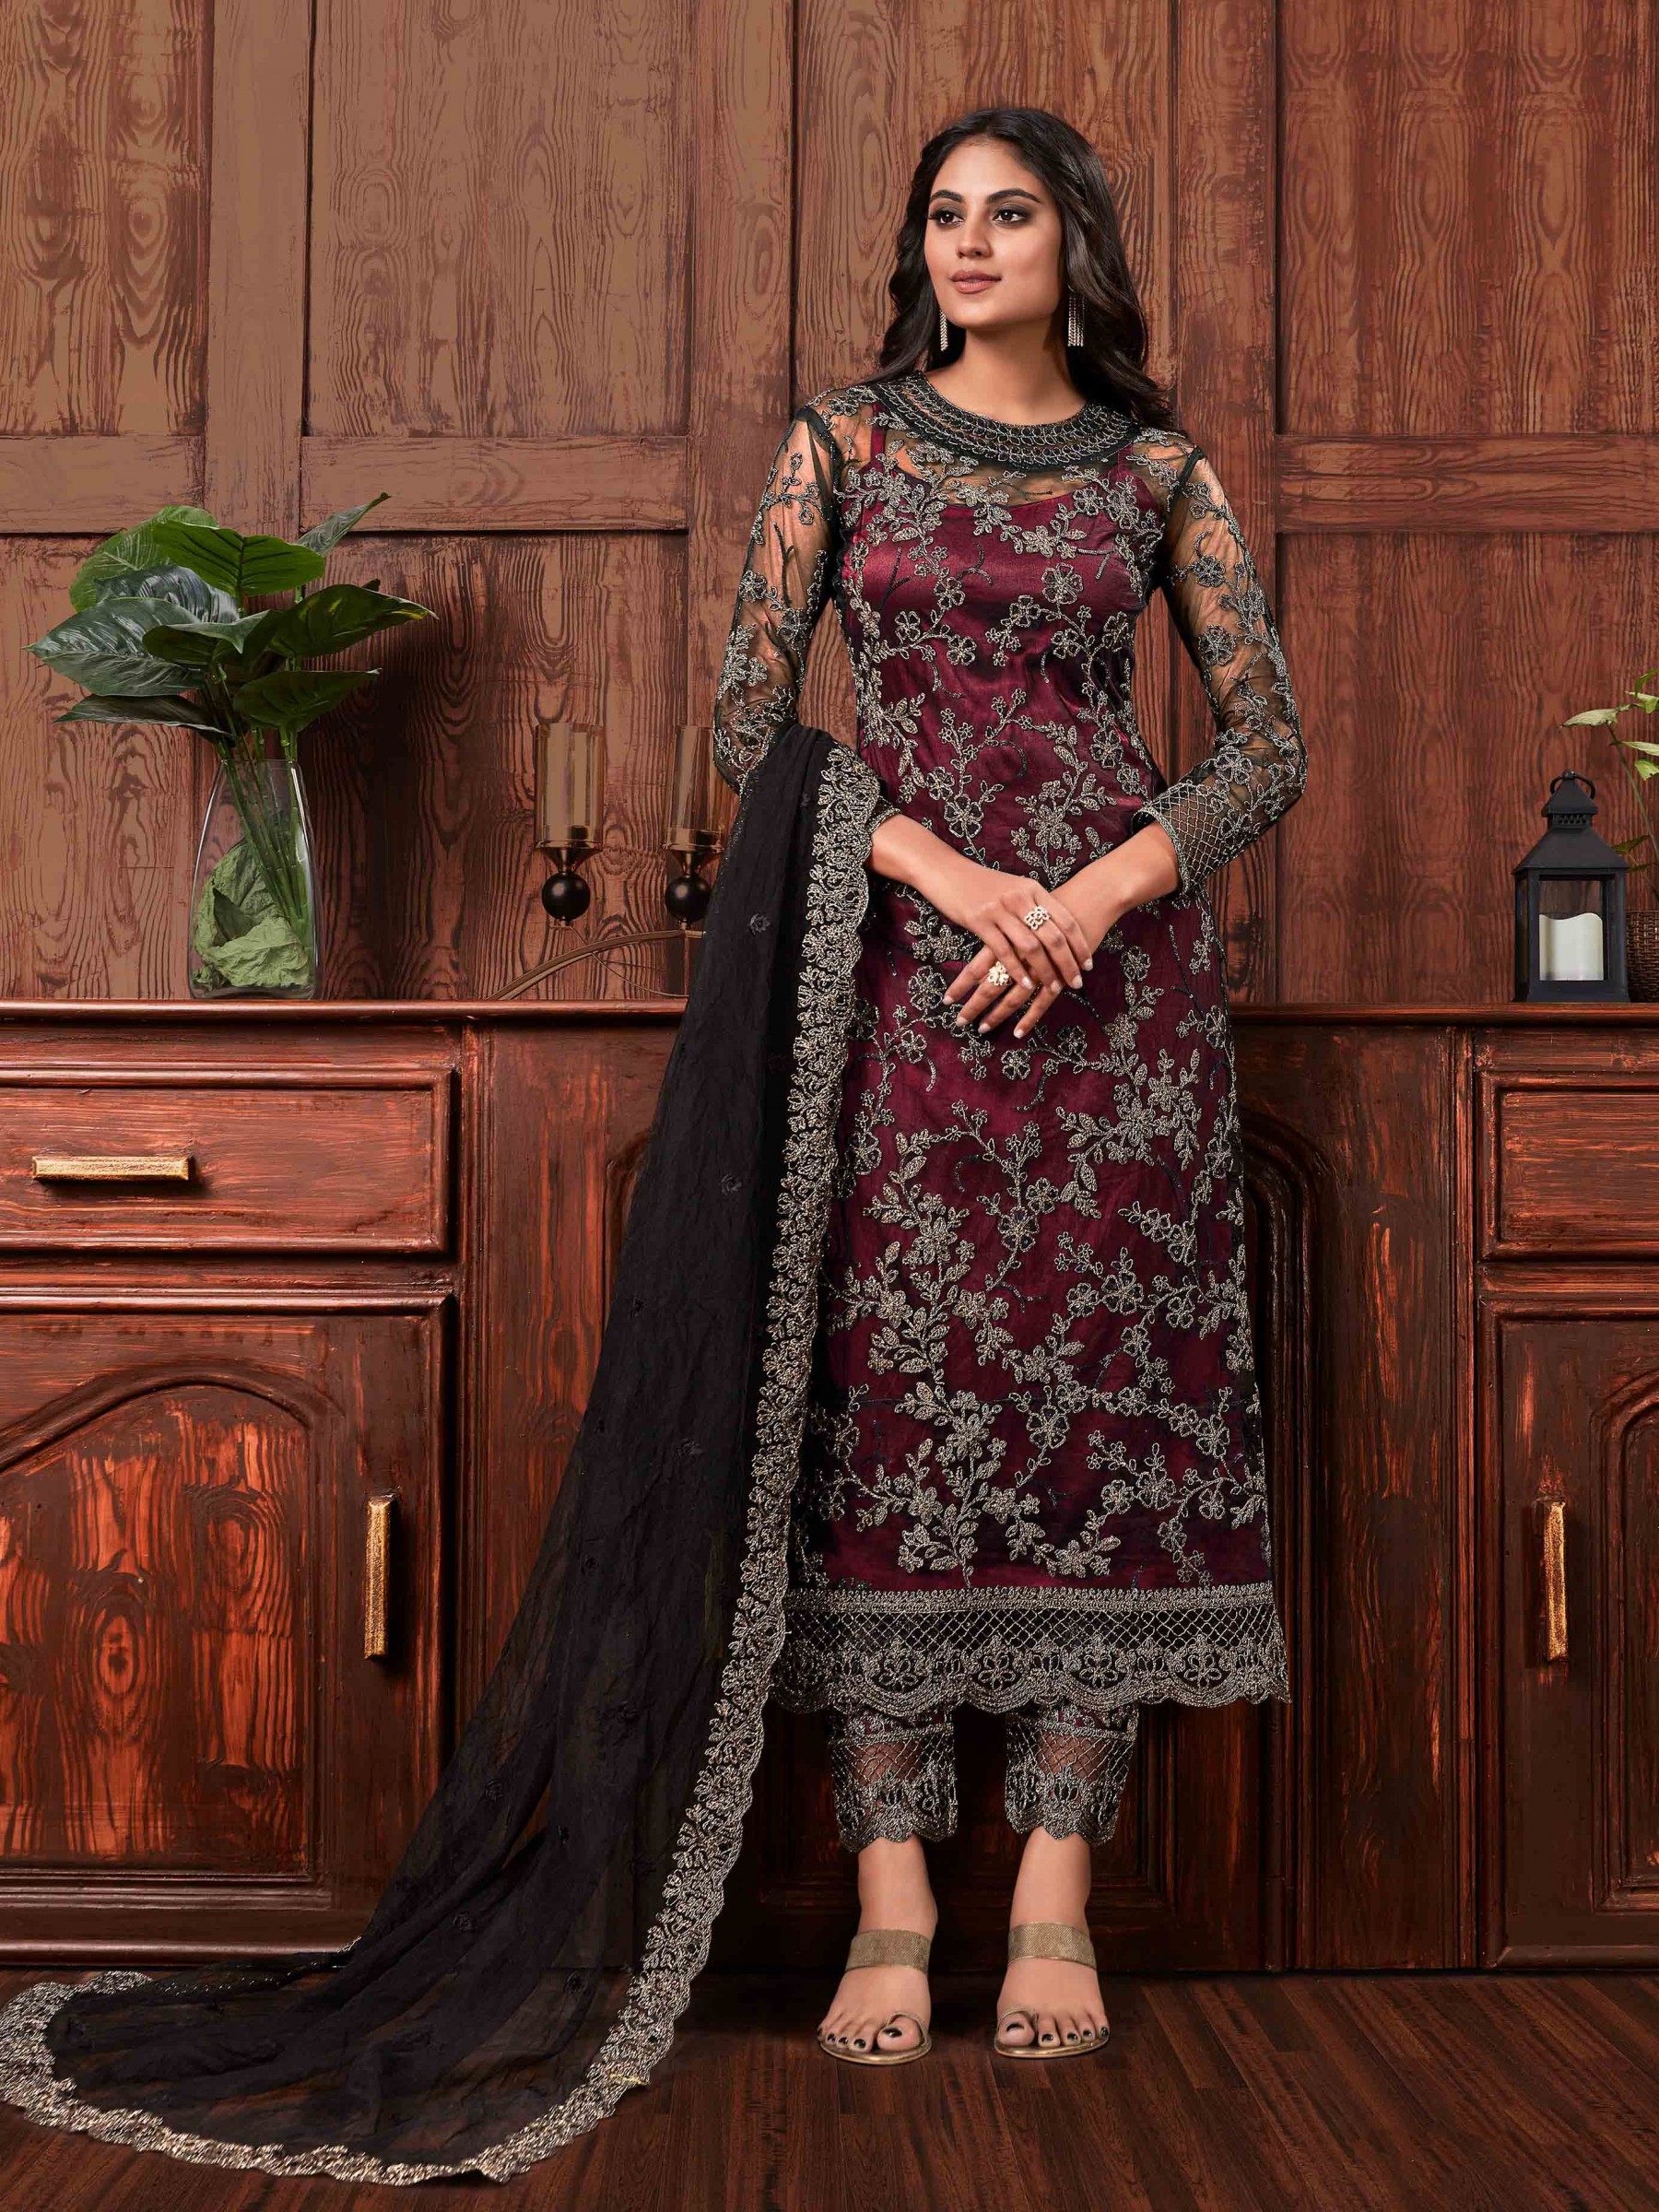 Butterfly Net Fabric Party Wear Readymade Suit In Black & Maroon Color With Embroidery 